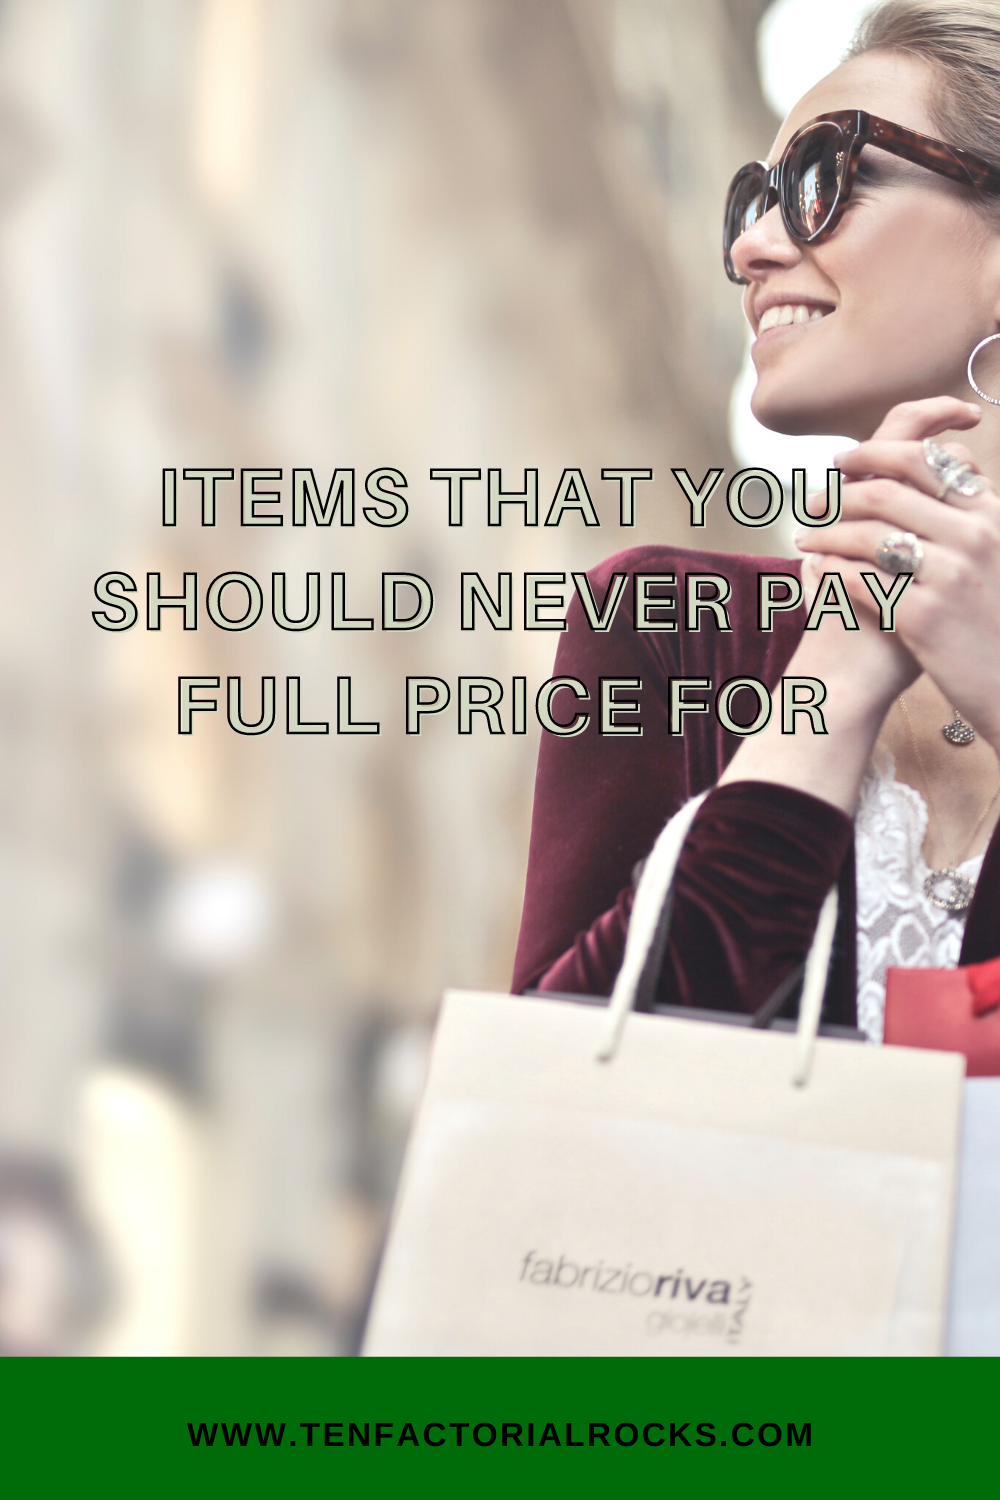 Items That You Should Never Pay Full Price For